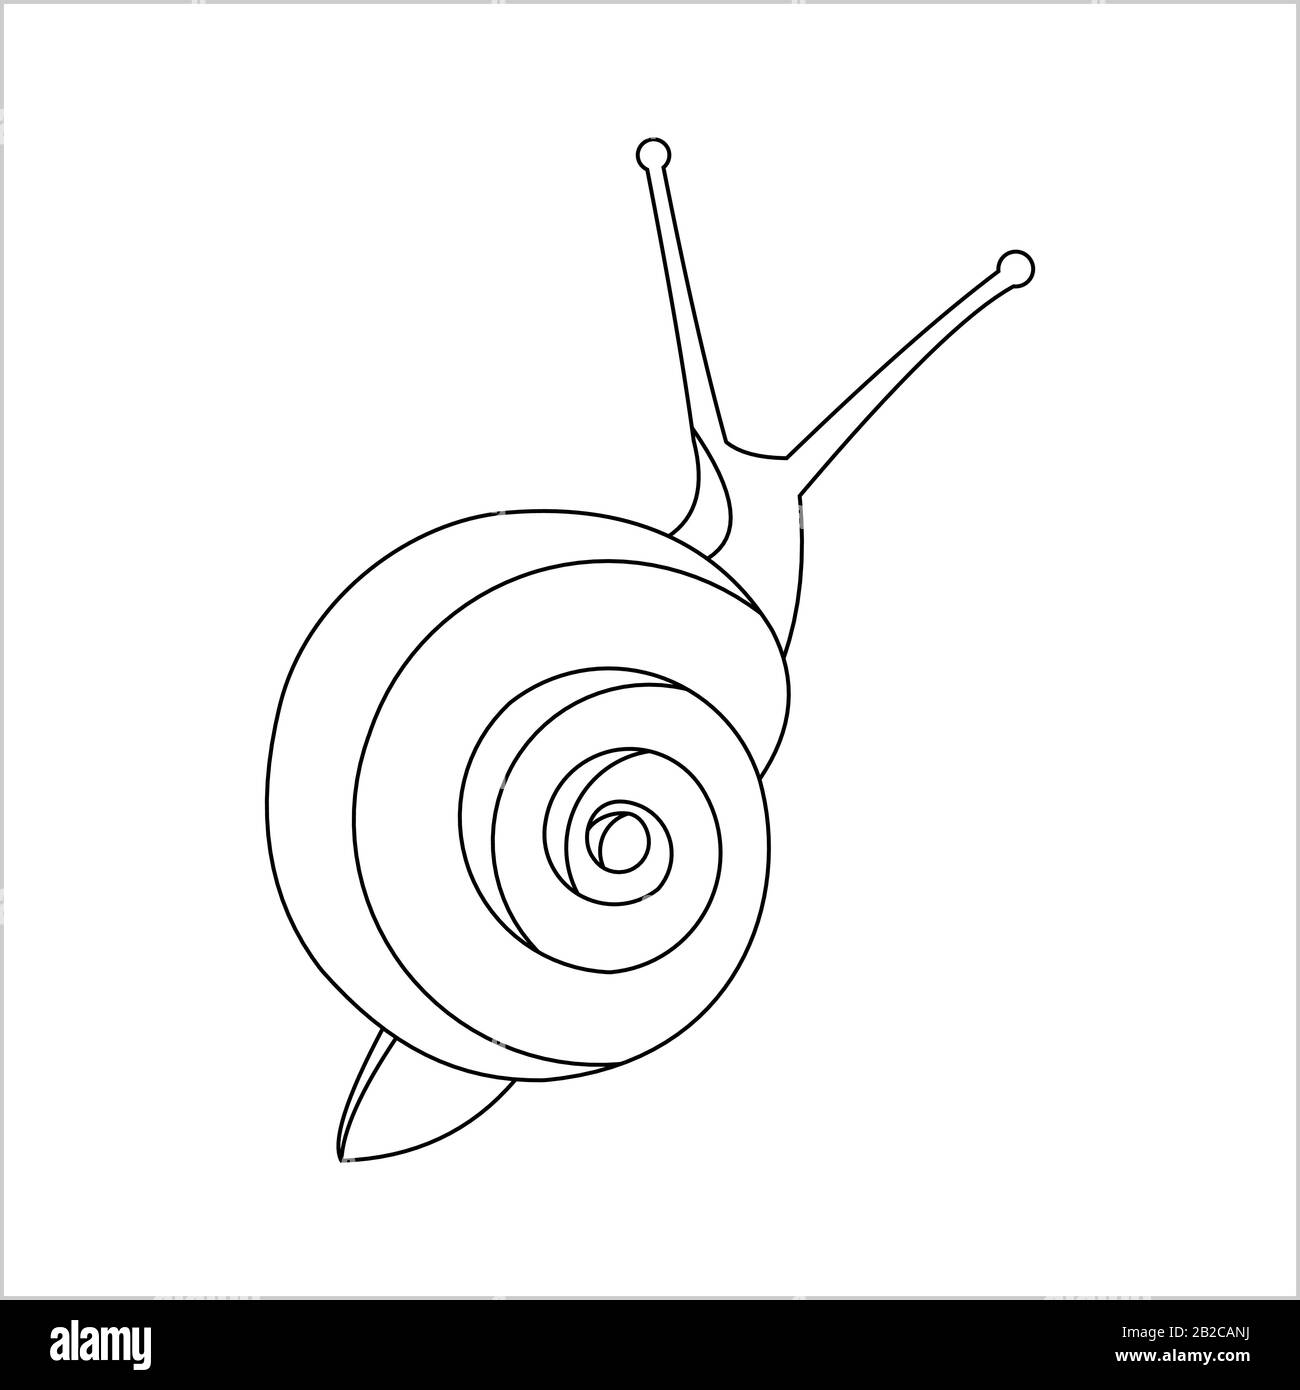 Snail For Coloring Book for kids and adults, Top view. Symbol of Slowness. Modern flat Vector illustration on white background. Stock Vector